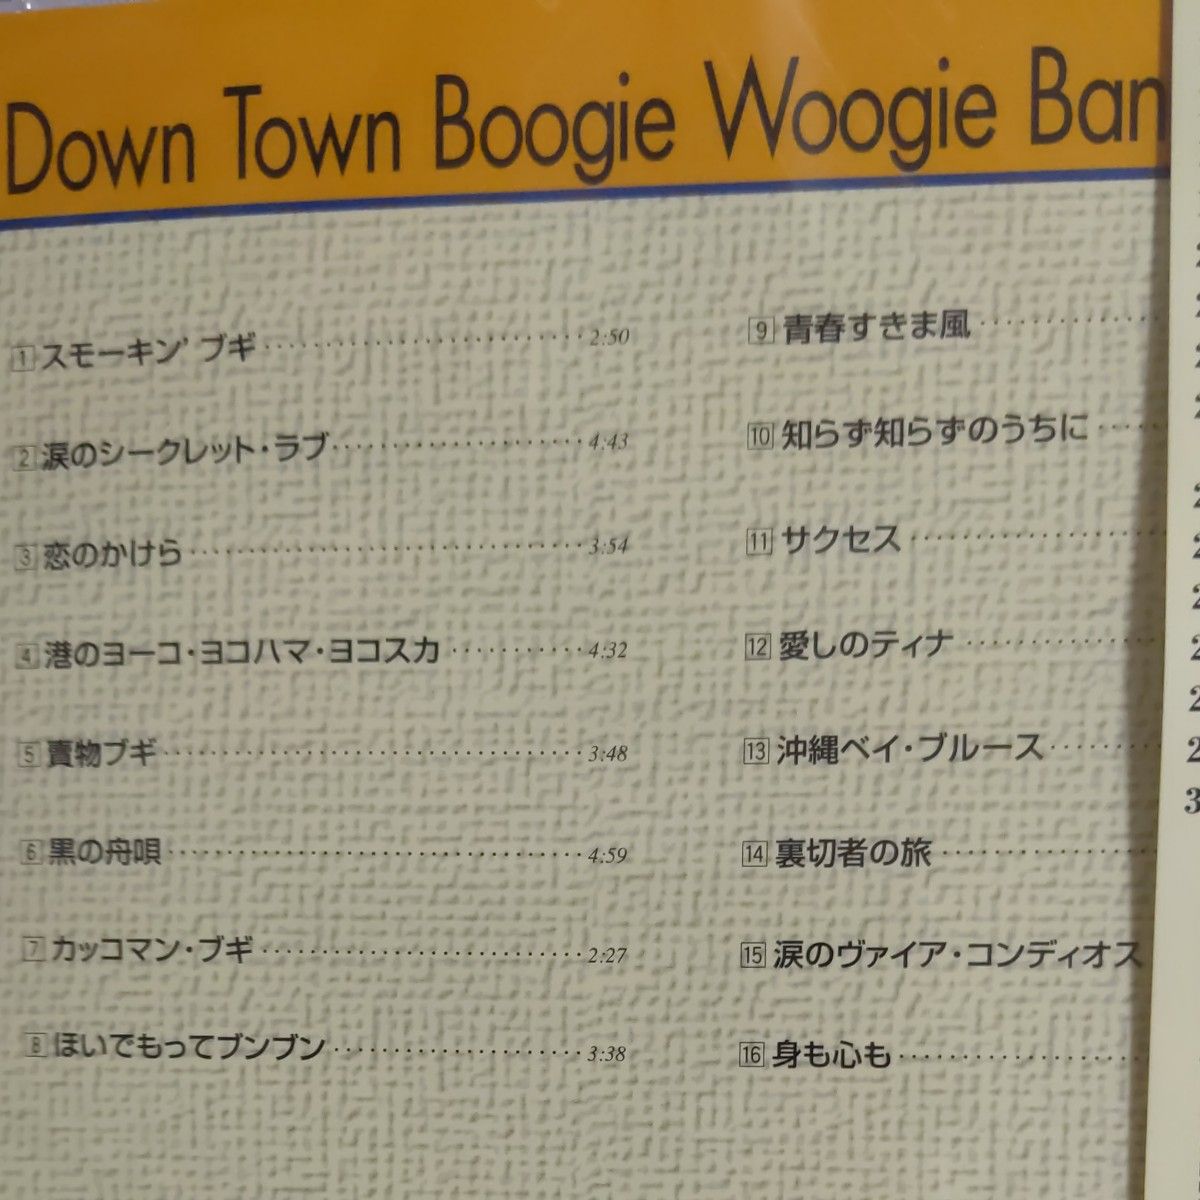 CD Down Town Boogie Woogie Band (ダウンタウンブギウギバンド) 　新品未開封